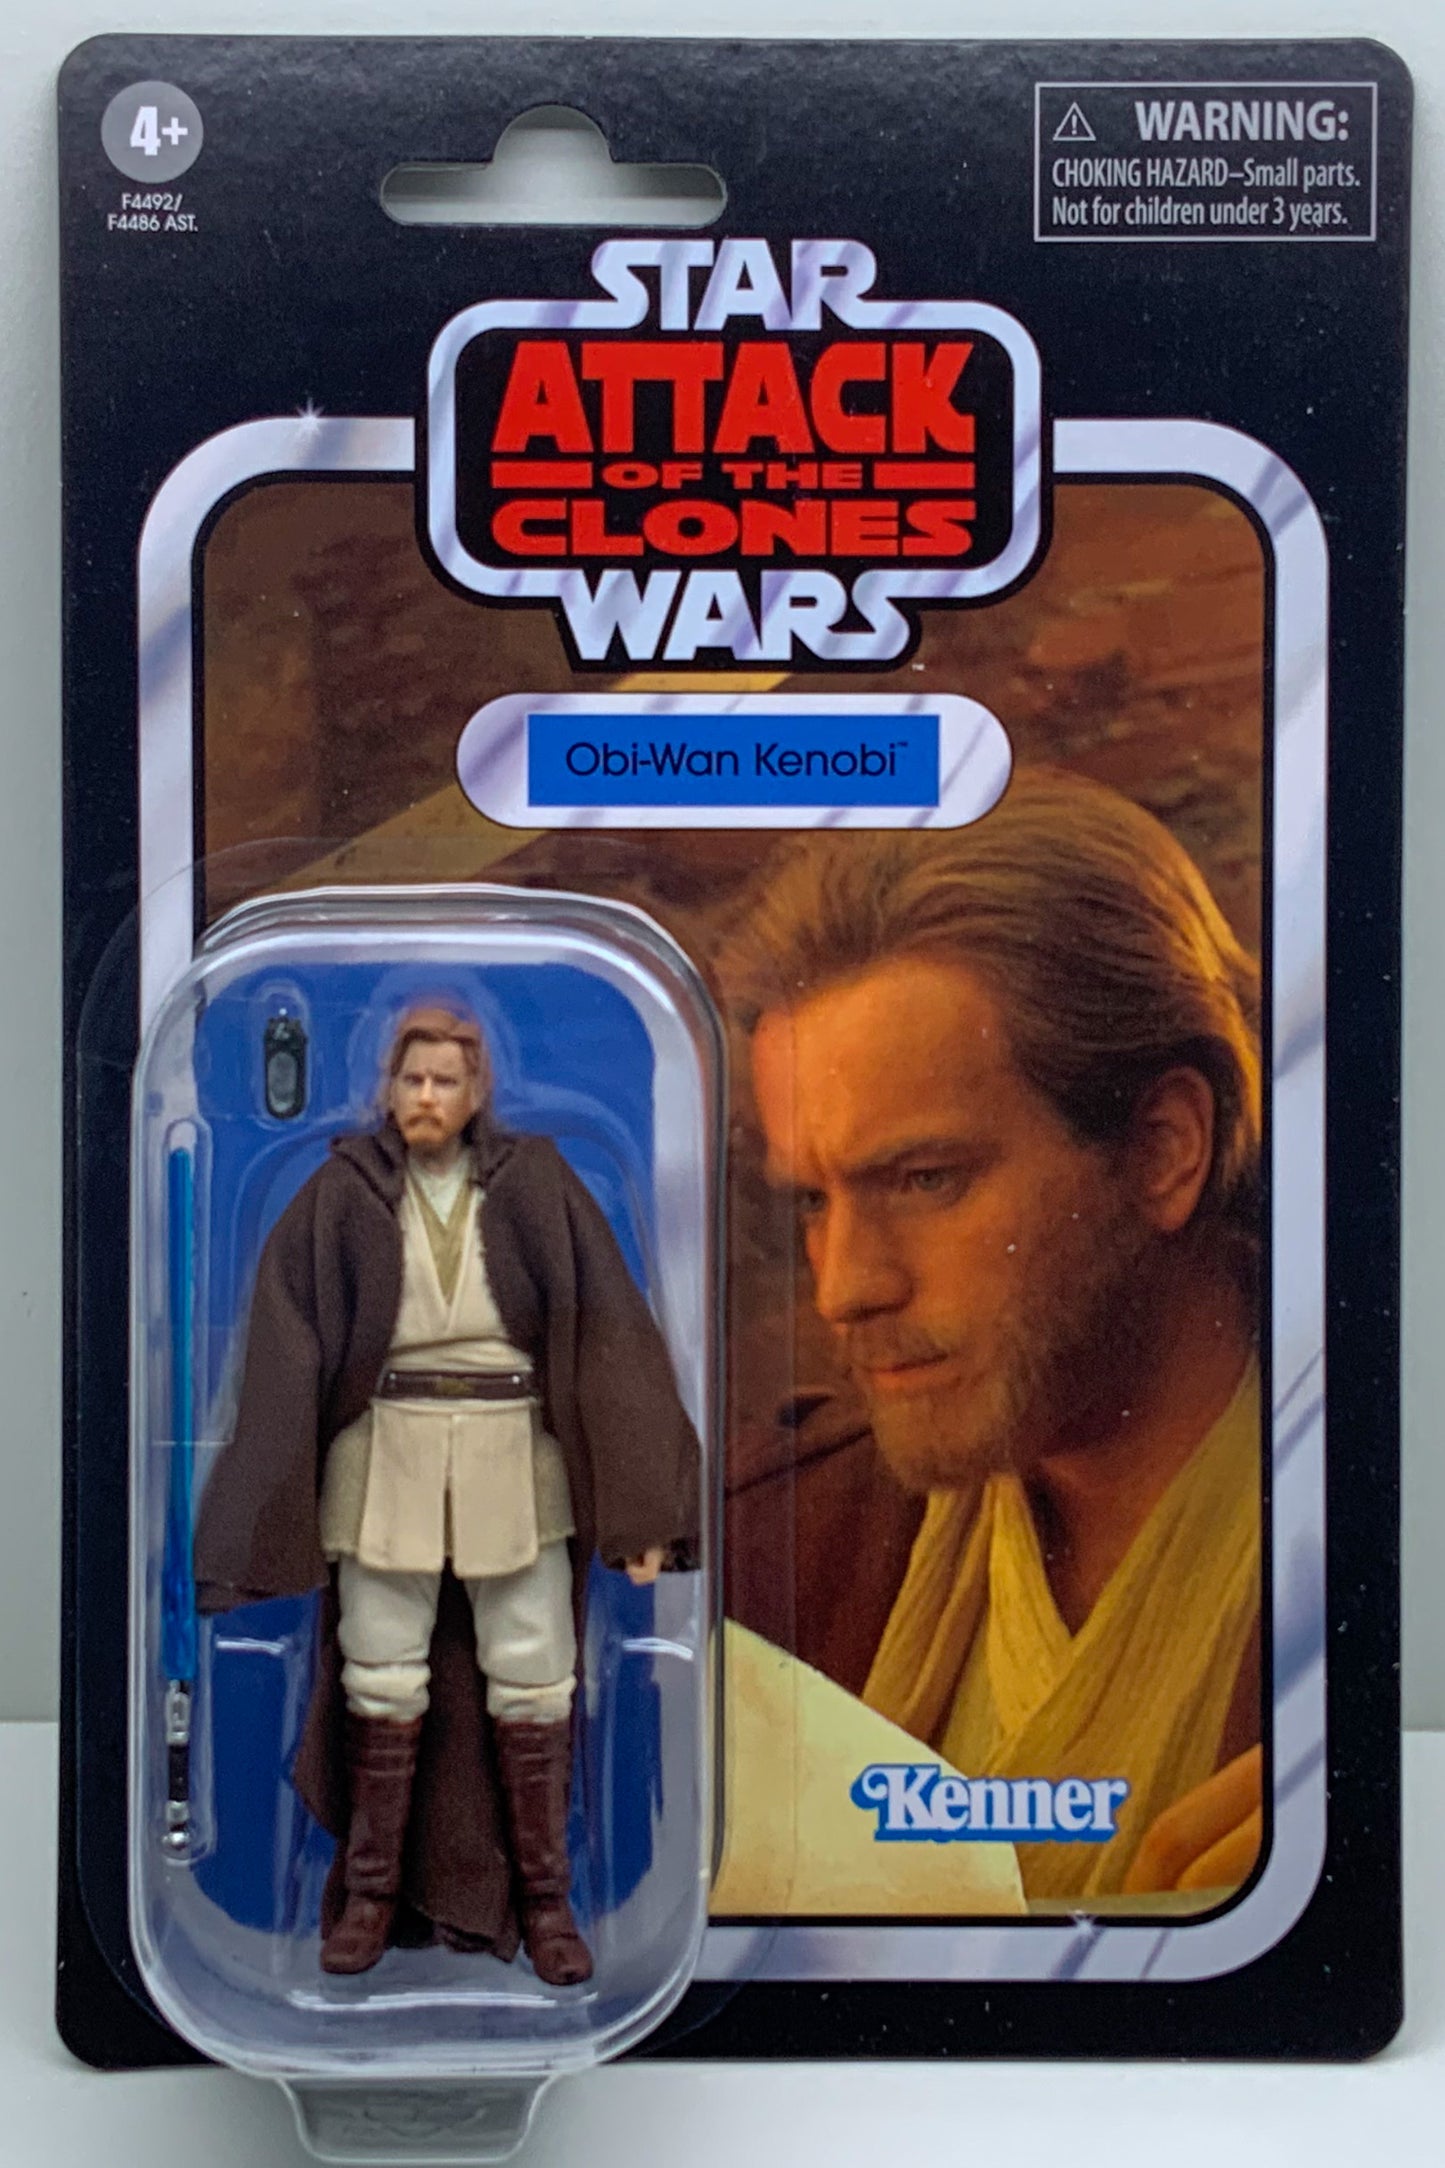 Buy Now at Tatoyshop.com Legendary Jedi Master, Obi-Wan Kenobi was a noble man, gifted in the ways of the Force. He trained Anakin Skywalker and served as a general in the Republic Army